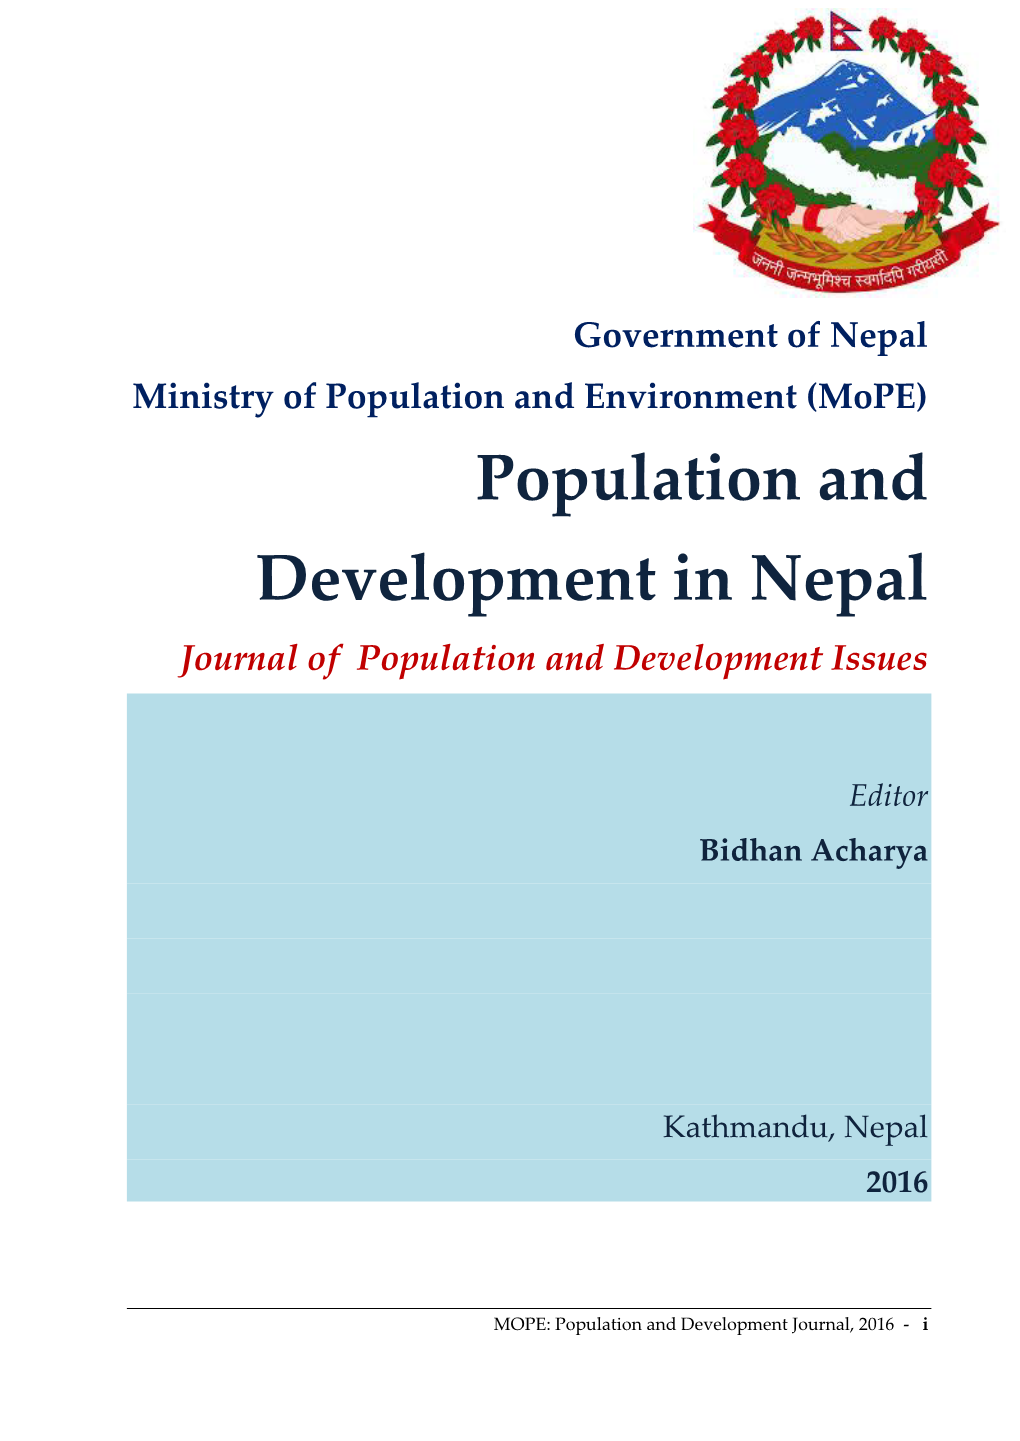 Journal of Population and Development Issues